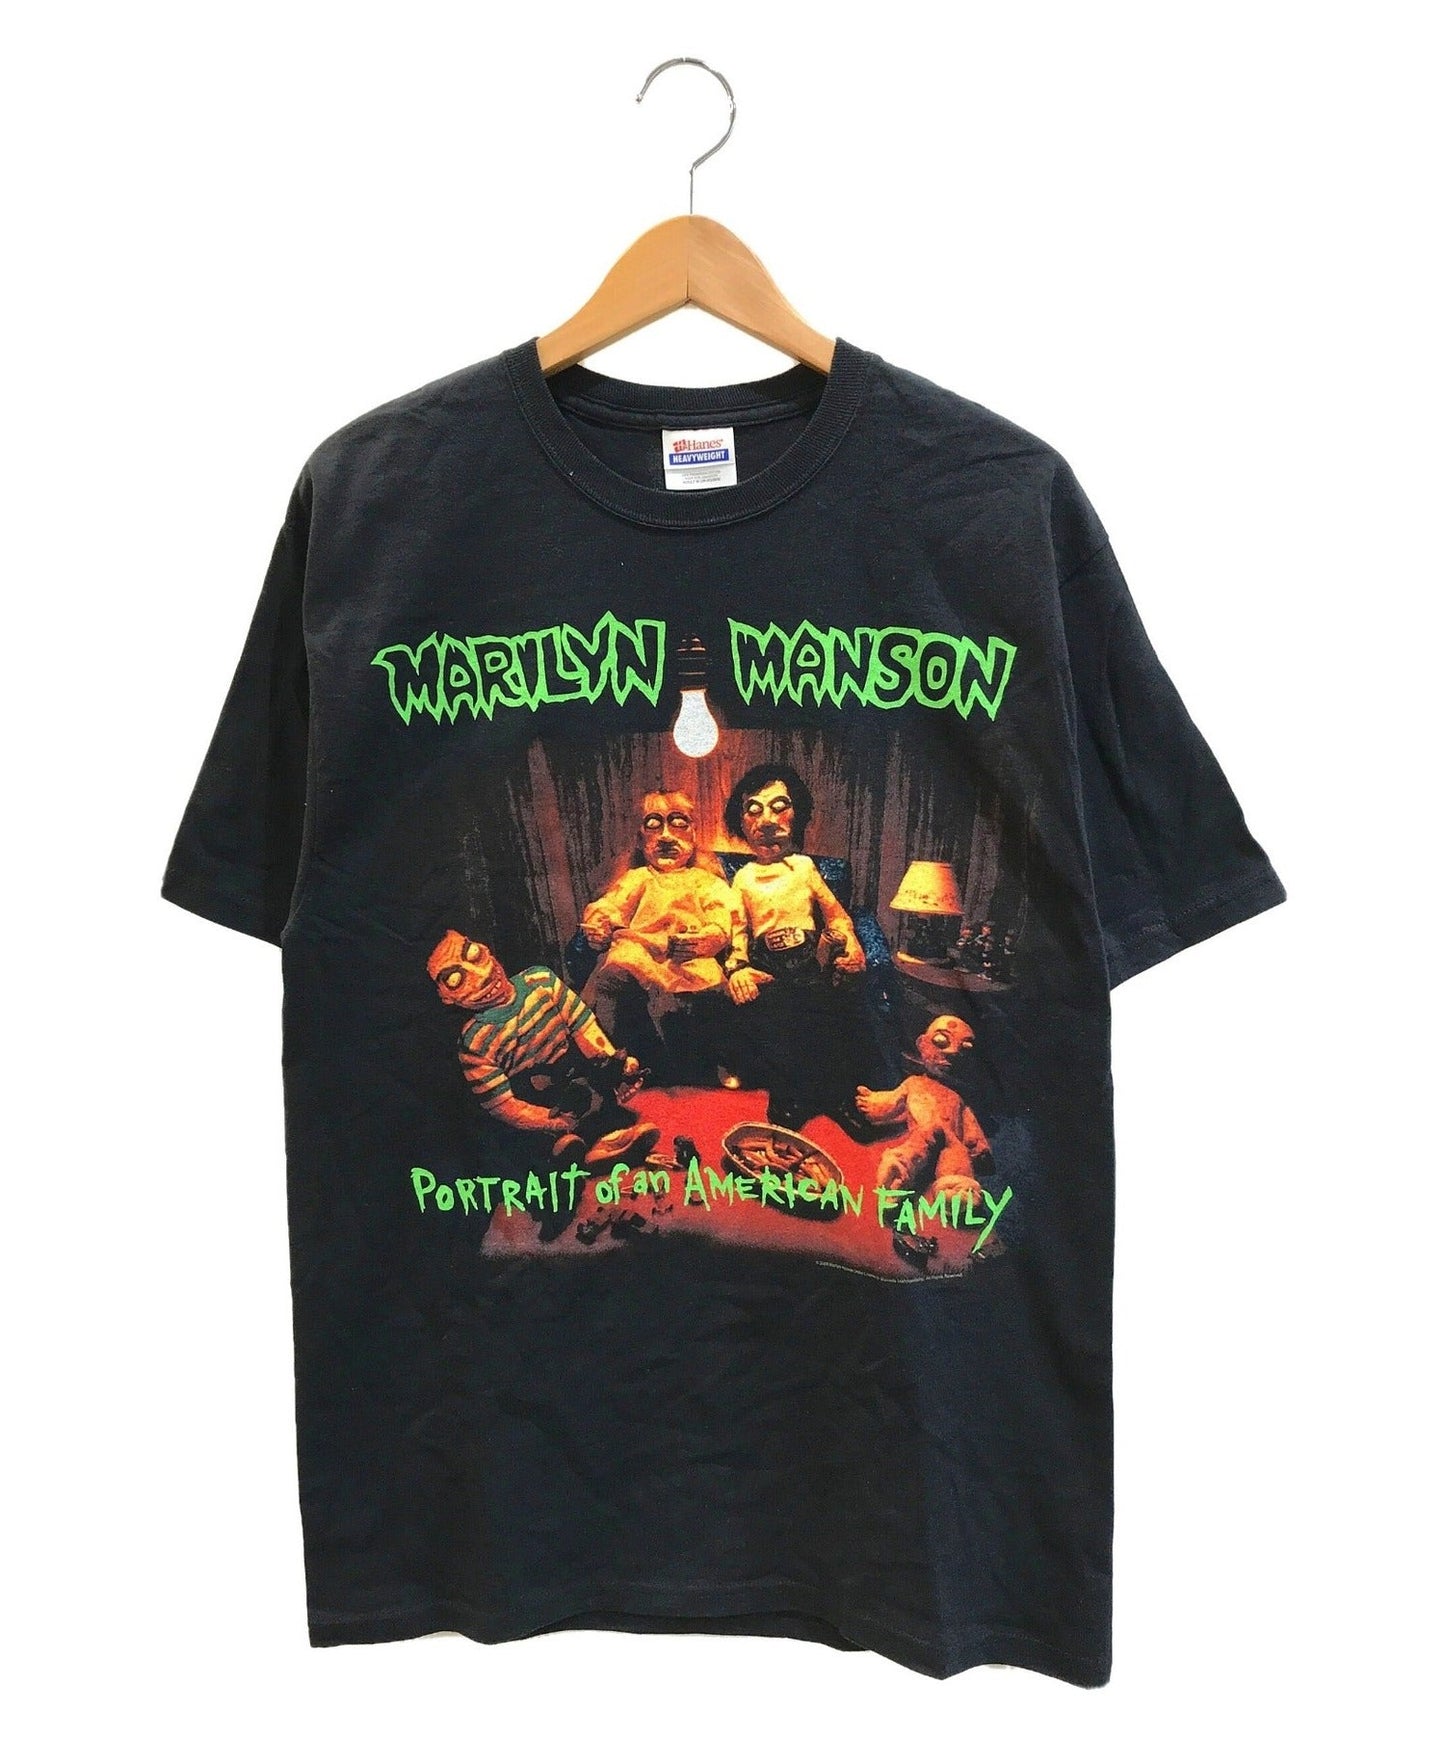 [Pre-owned] [Vintage Clothes] Marilyn Manson Band T-Shirt